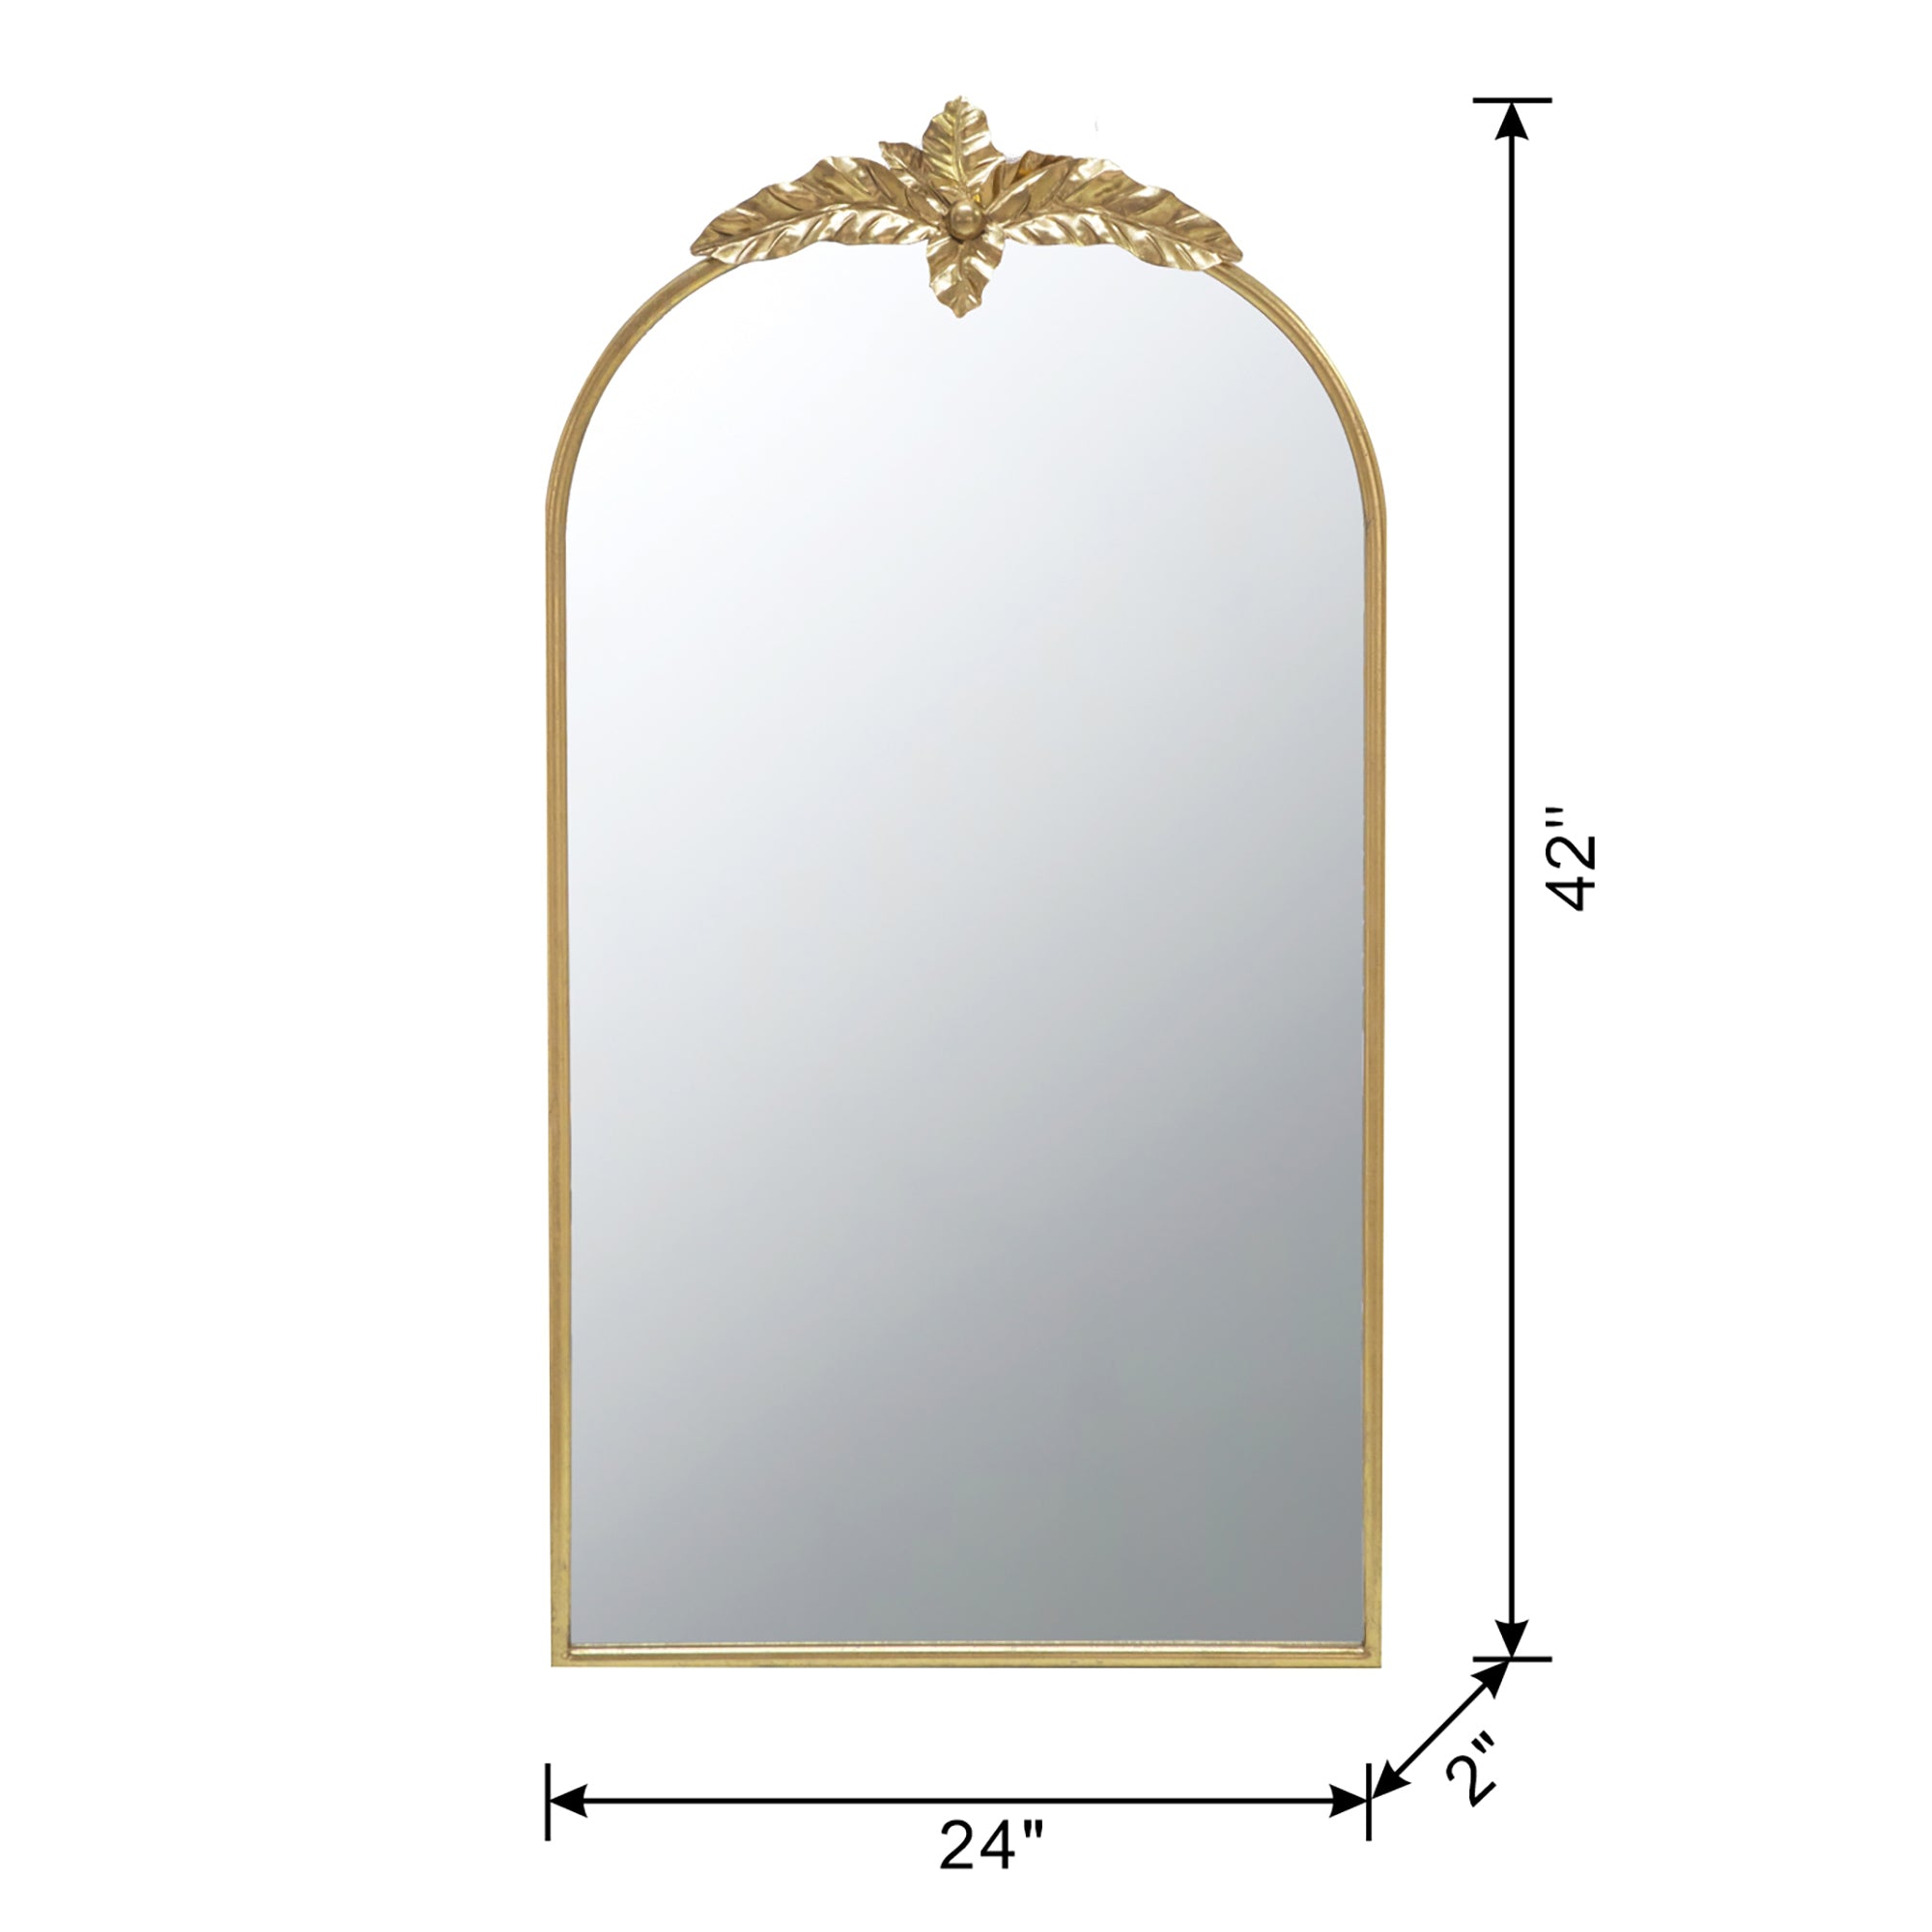 24" x 42" Arched Wall Mirror with Gold Metal Frame gold-iron